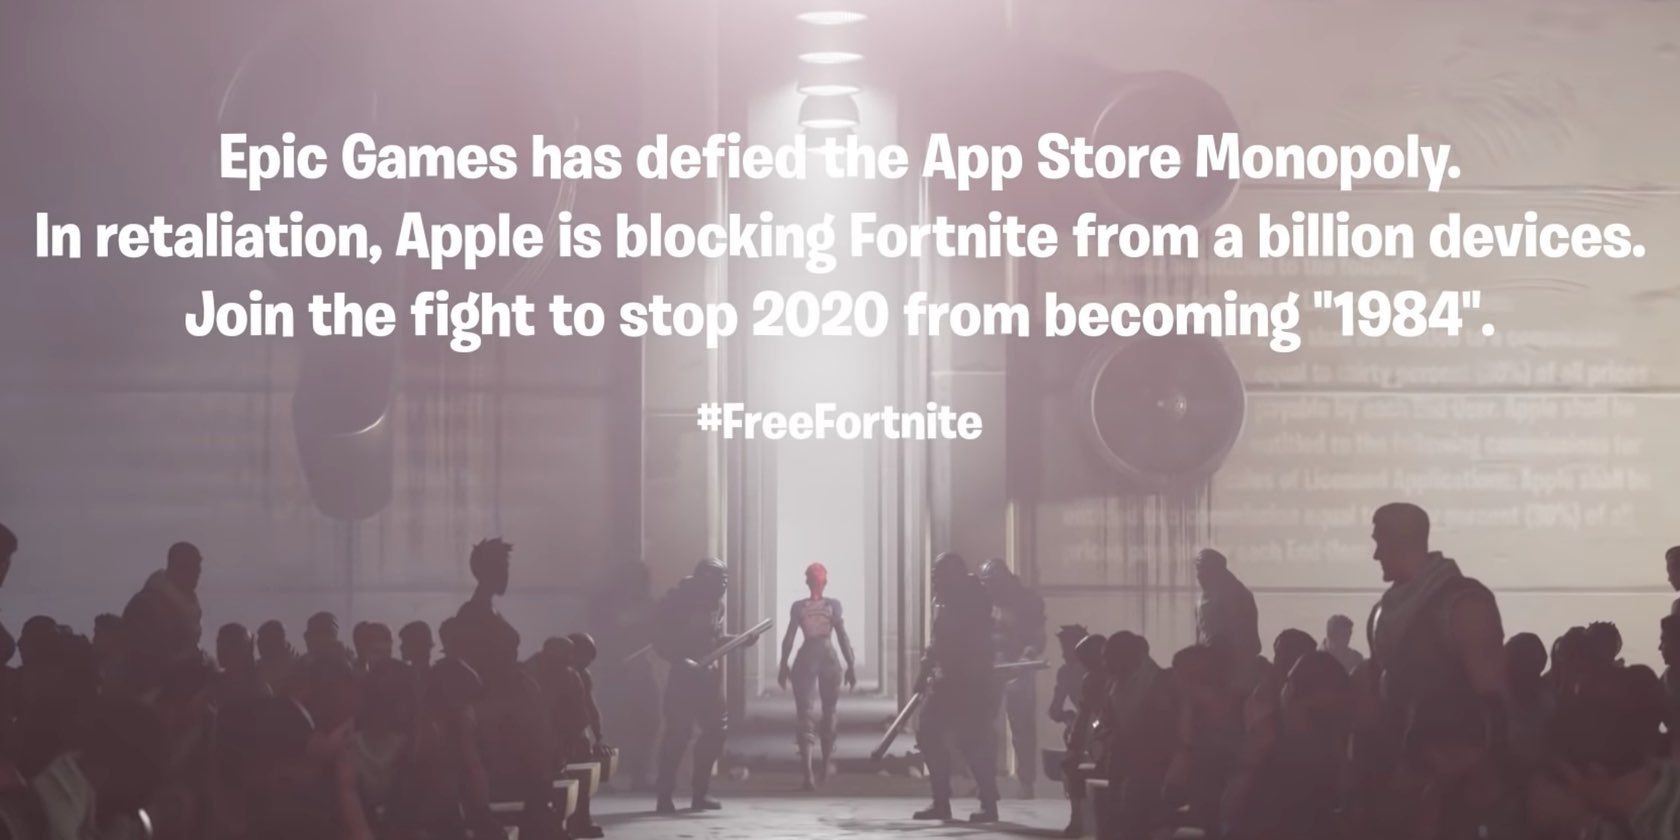 A still from a Free Fortnite video by Epic Games announcing its legal fight against the App Store fees and terms of business